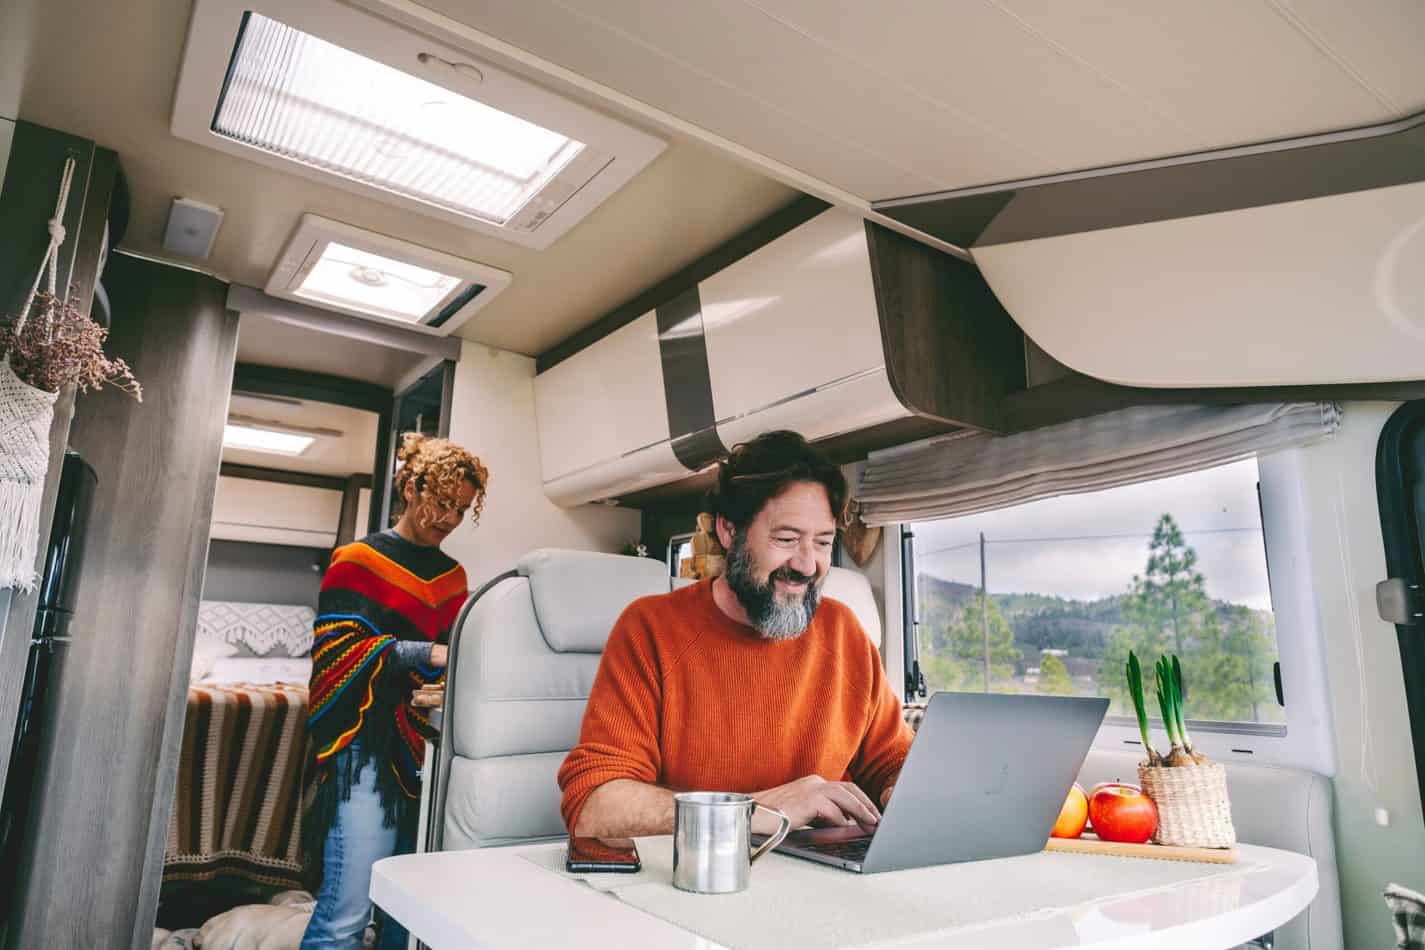 Man sitting an an RV table with a laptop, a woman standing behind him at a kitchen counter